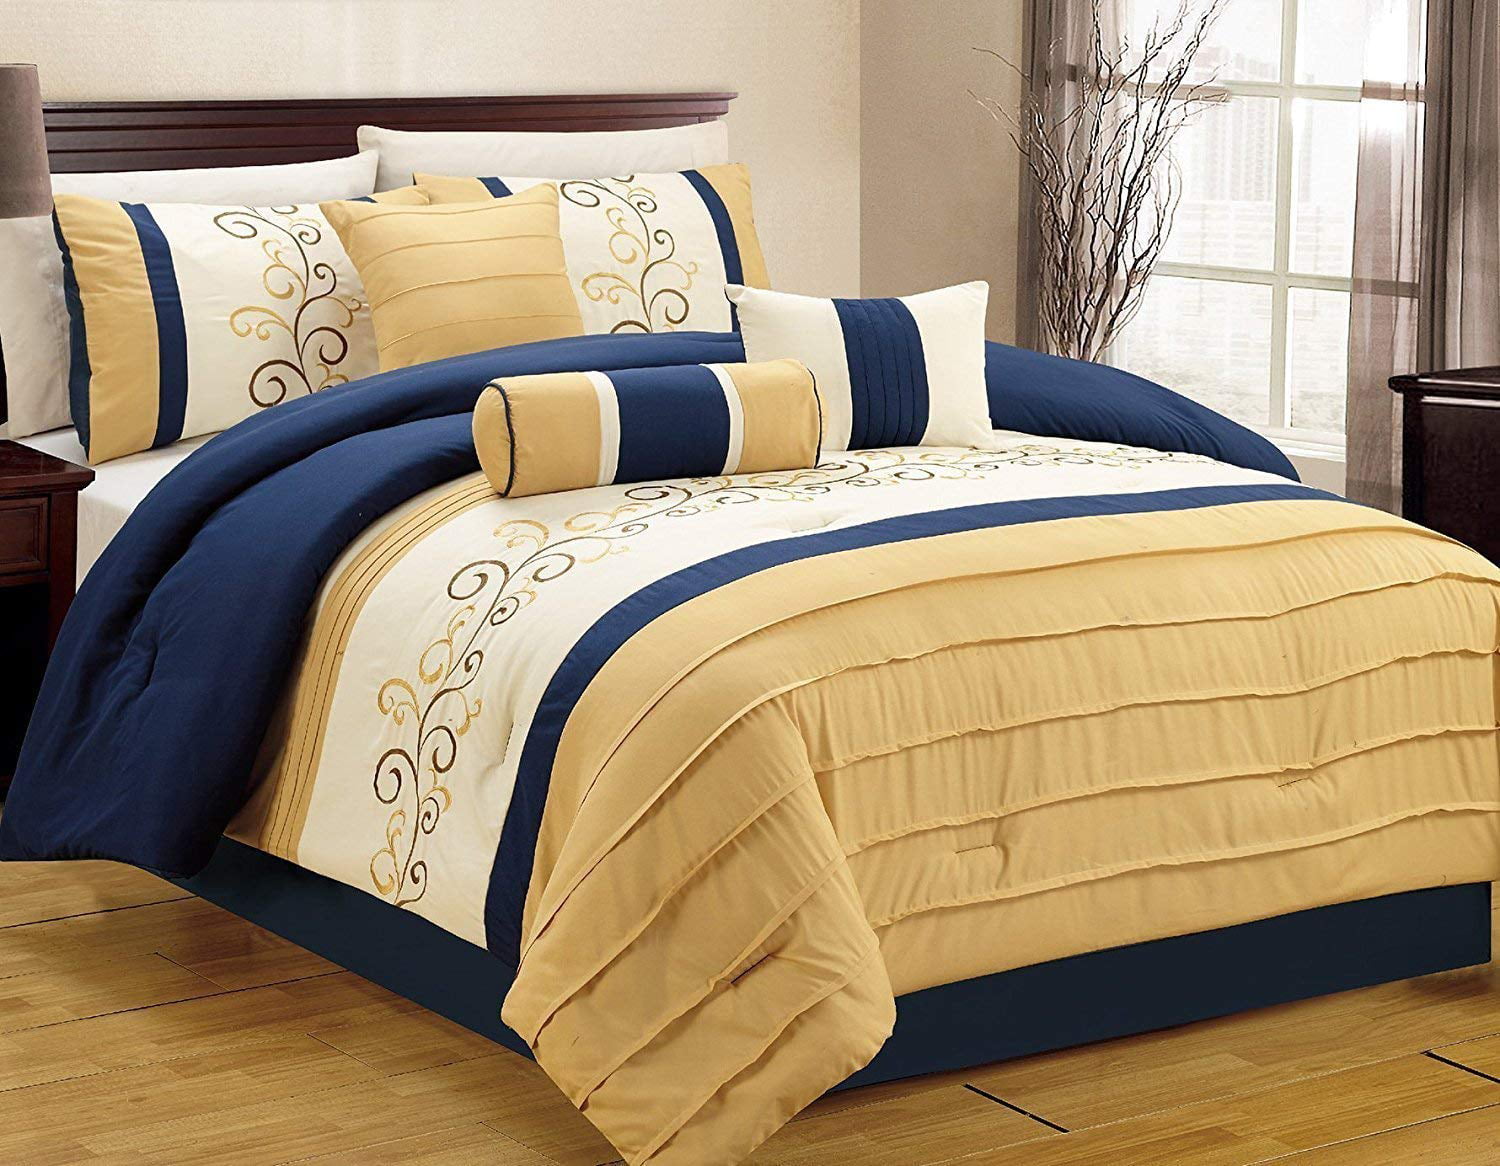 Luxlen p-20816-bluey-calk Closeout 7 Piece Luxury Embroidery Bed in Bag Comforter Set Cal King, Blue/Yellow